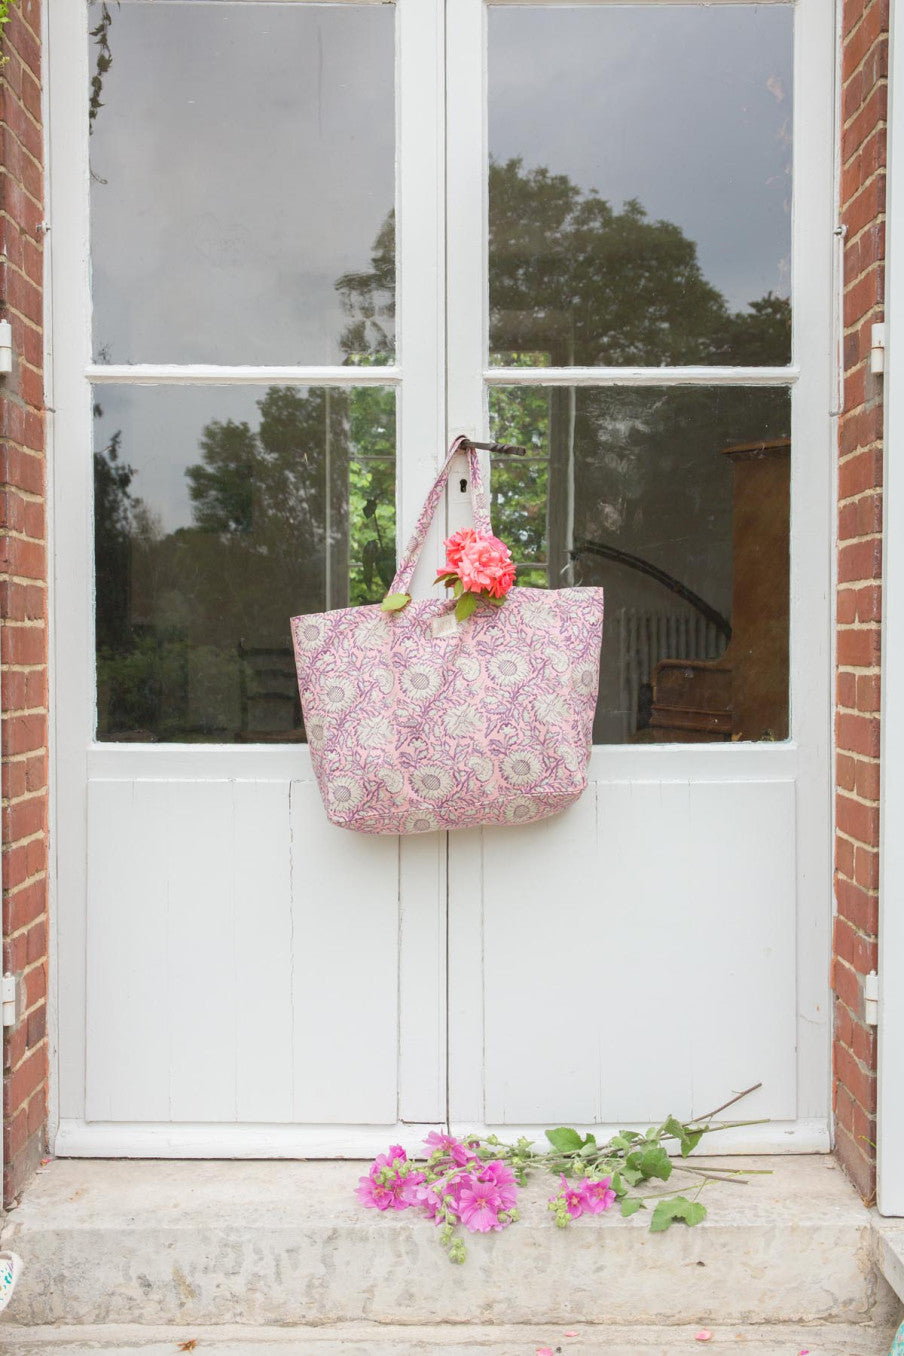 Louise Misha Large Tote Bag Beverly - Pink Daisy Garden - RUM Amsterdam